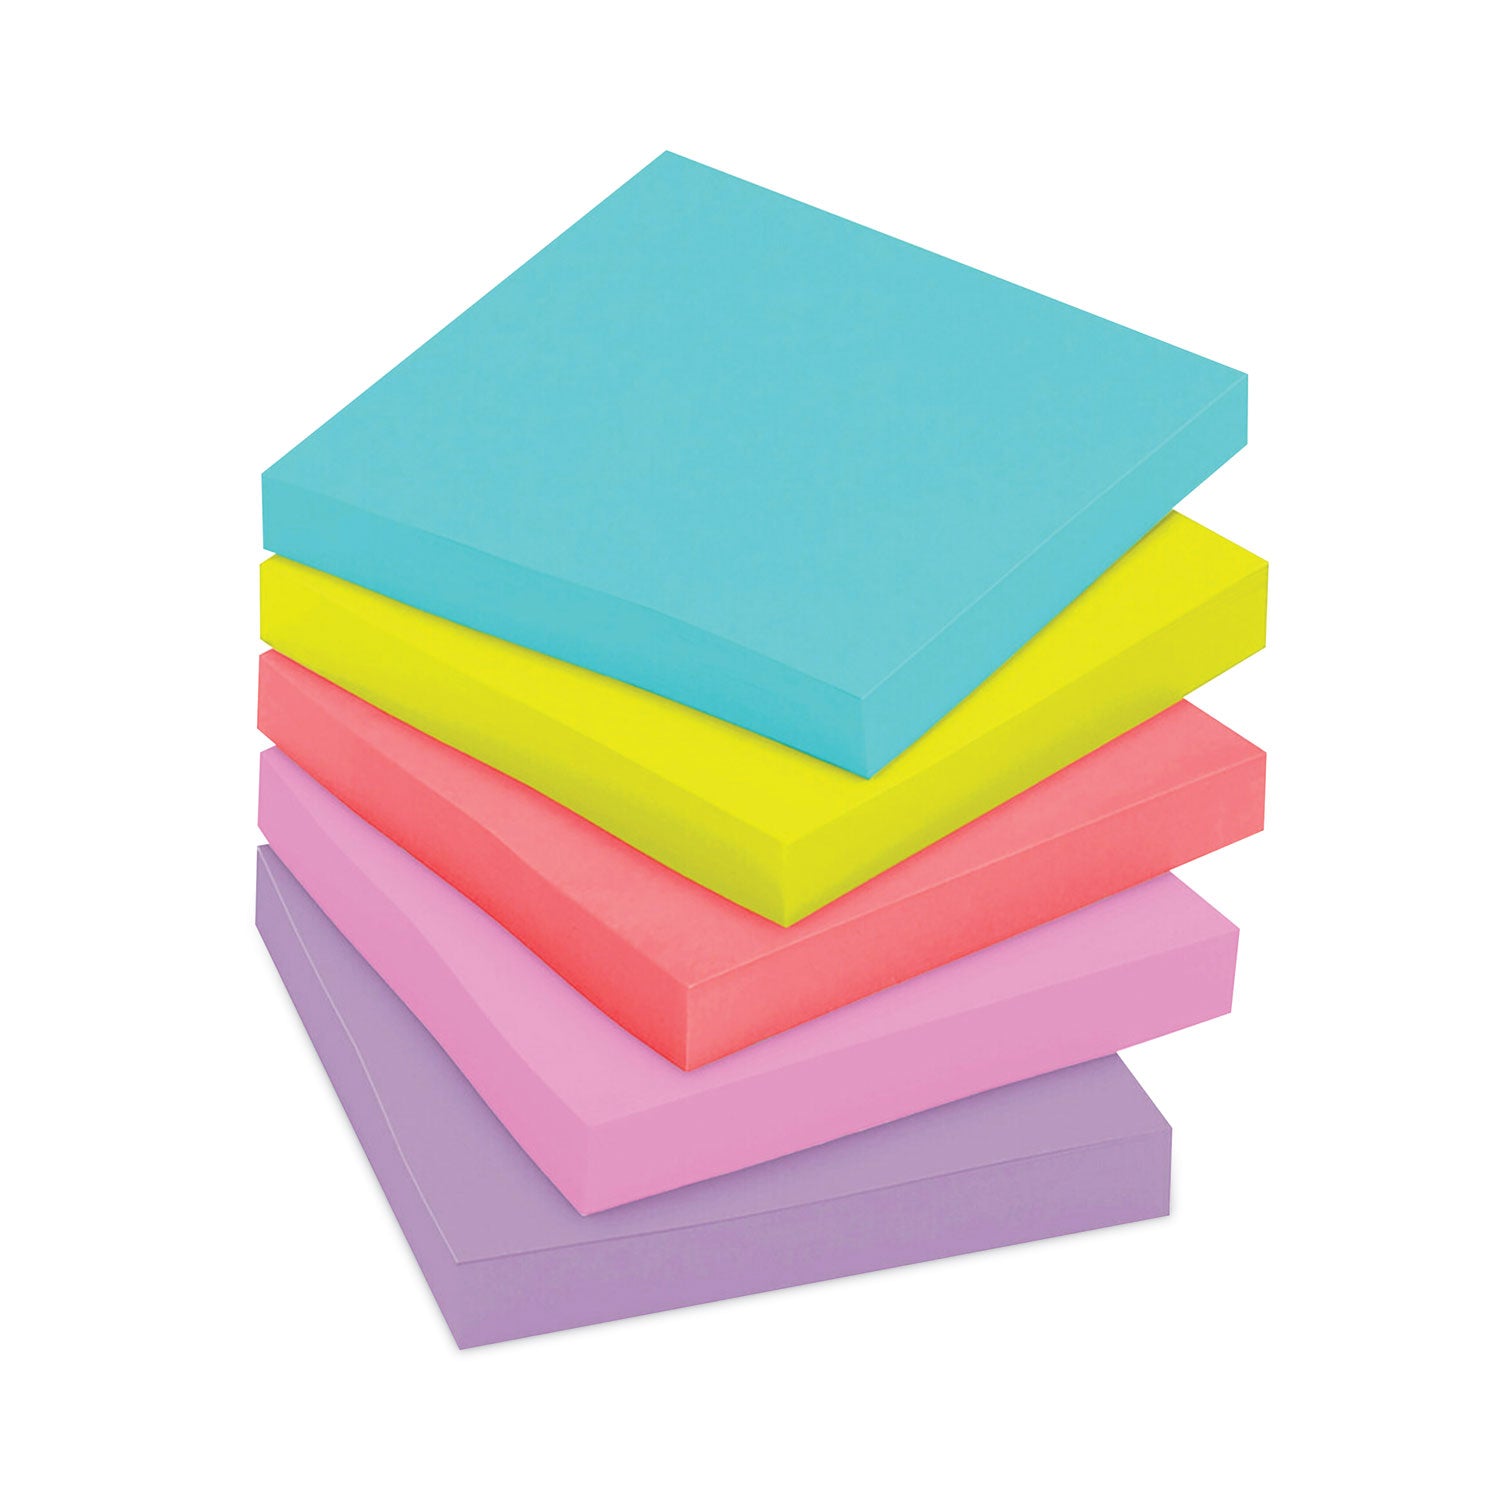 pads-in-supernova-neon-collection-colors-3-x-3-90-sheets-pad-12-pads-pack_mmm65412ssmia - 8